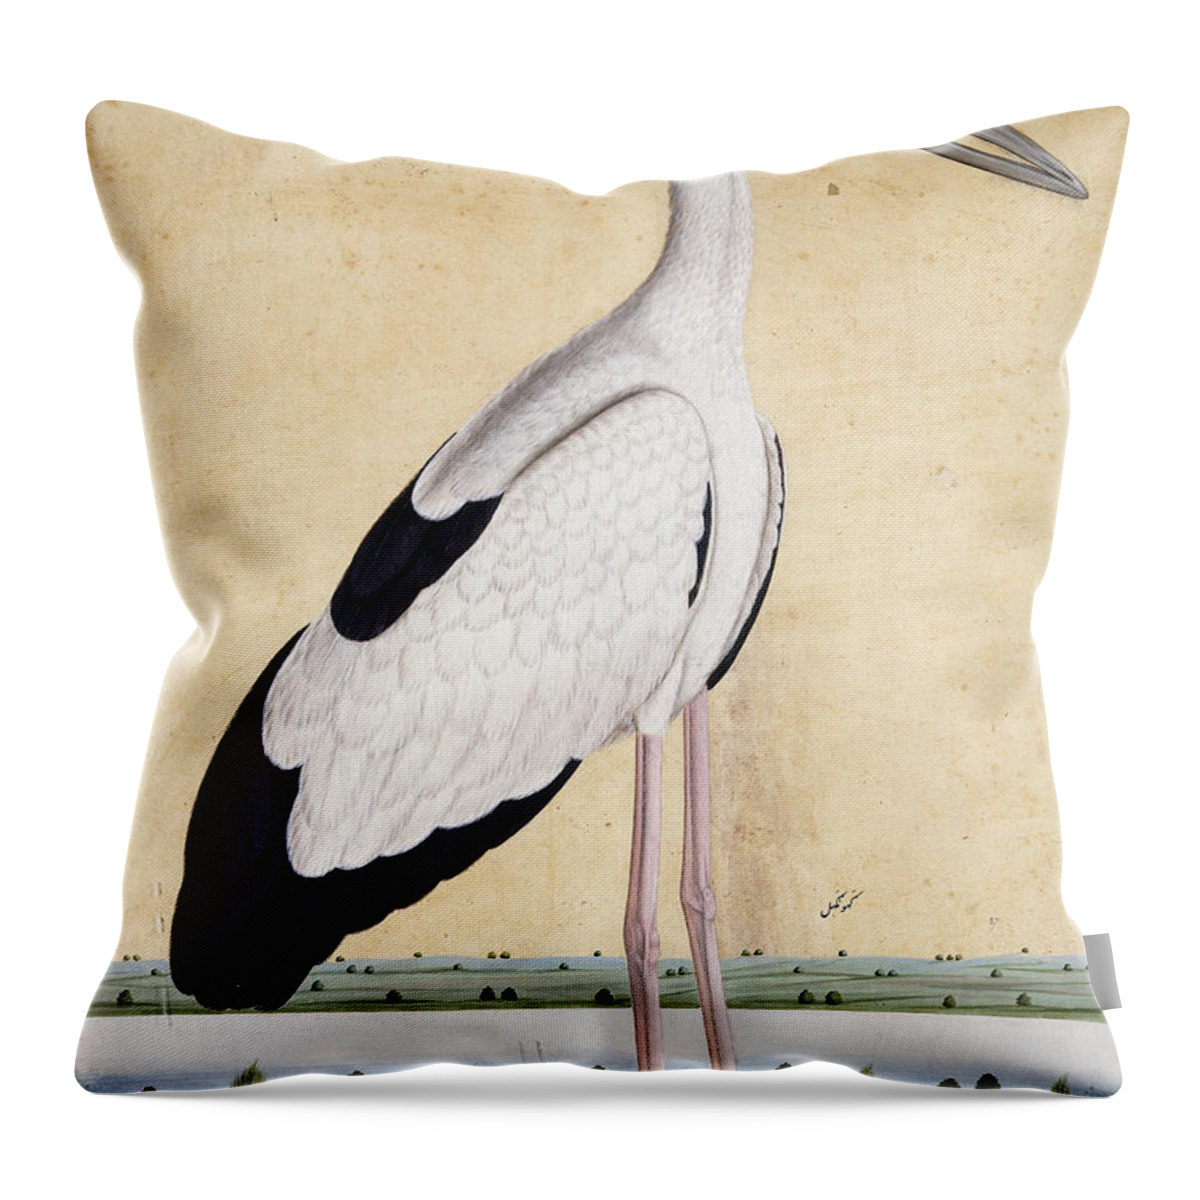 18th Century Throw Pillow featuring the painting An Open-beaked Stork, C. 1780 by Indian School